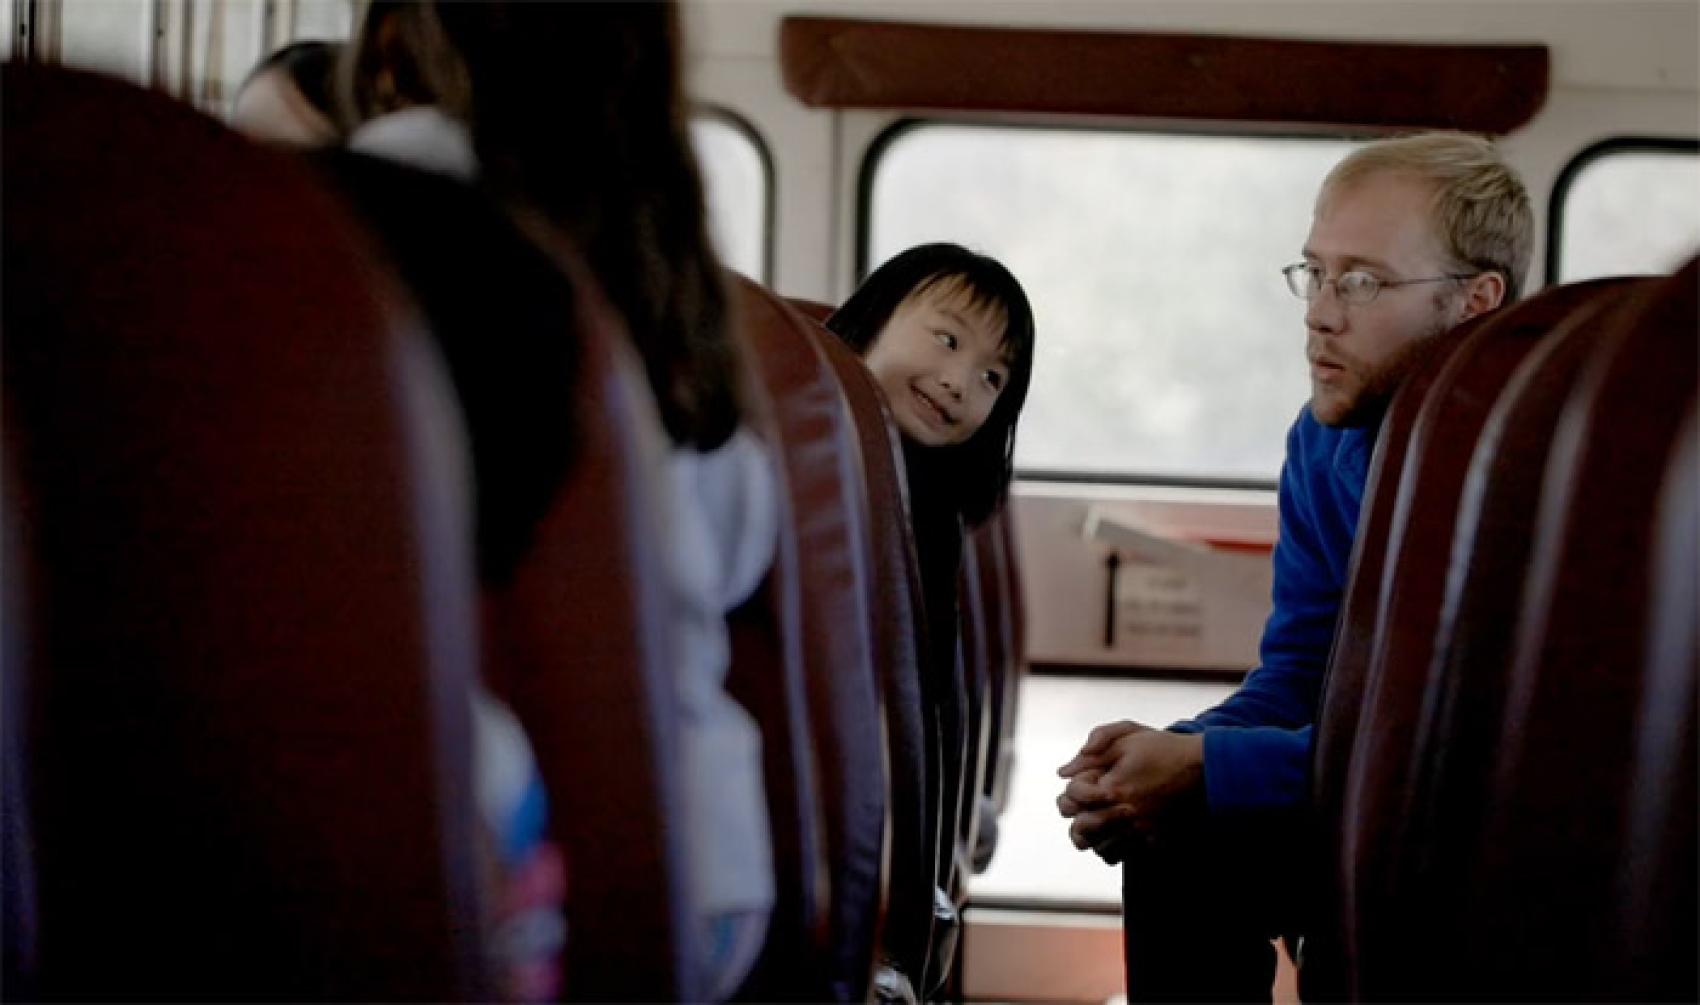 Counselor talking with kids on a bus